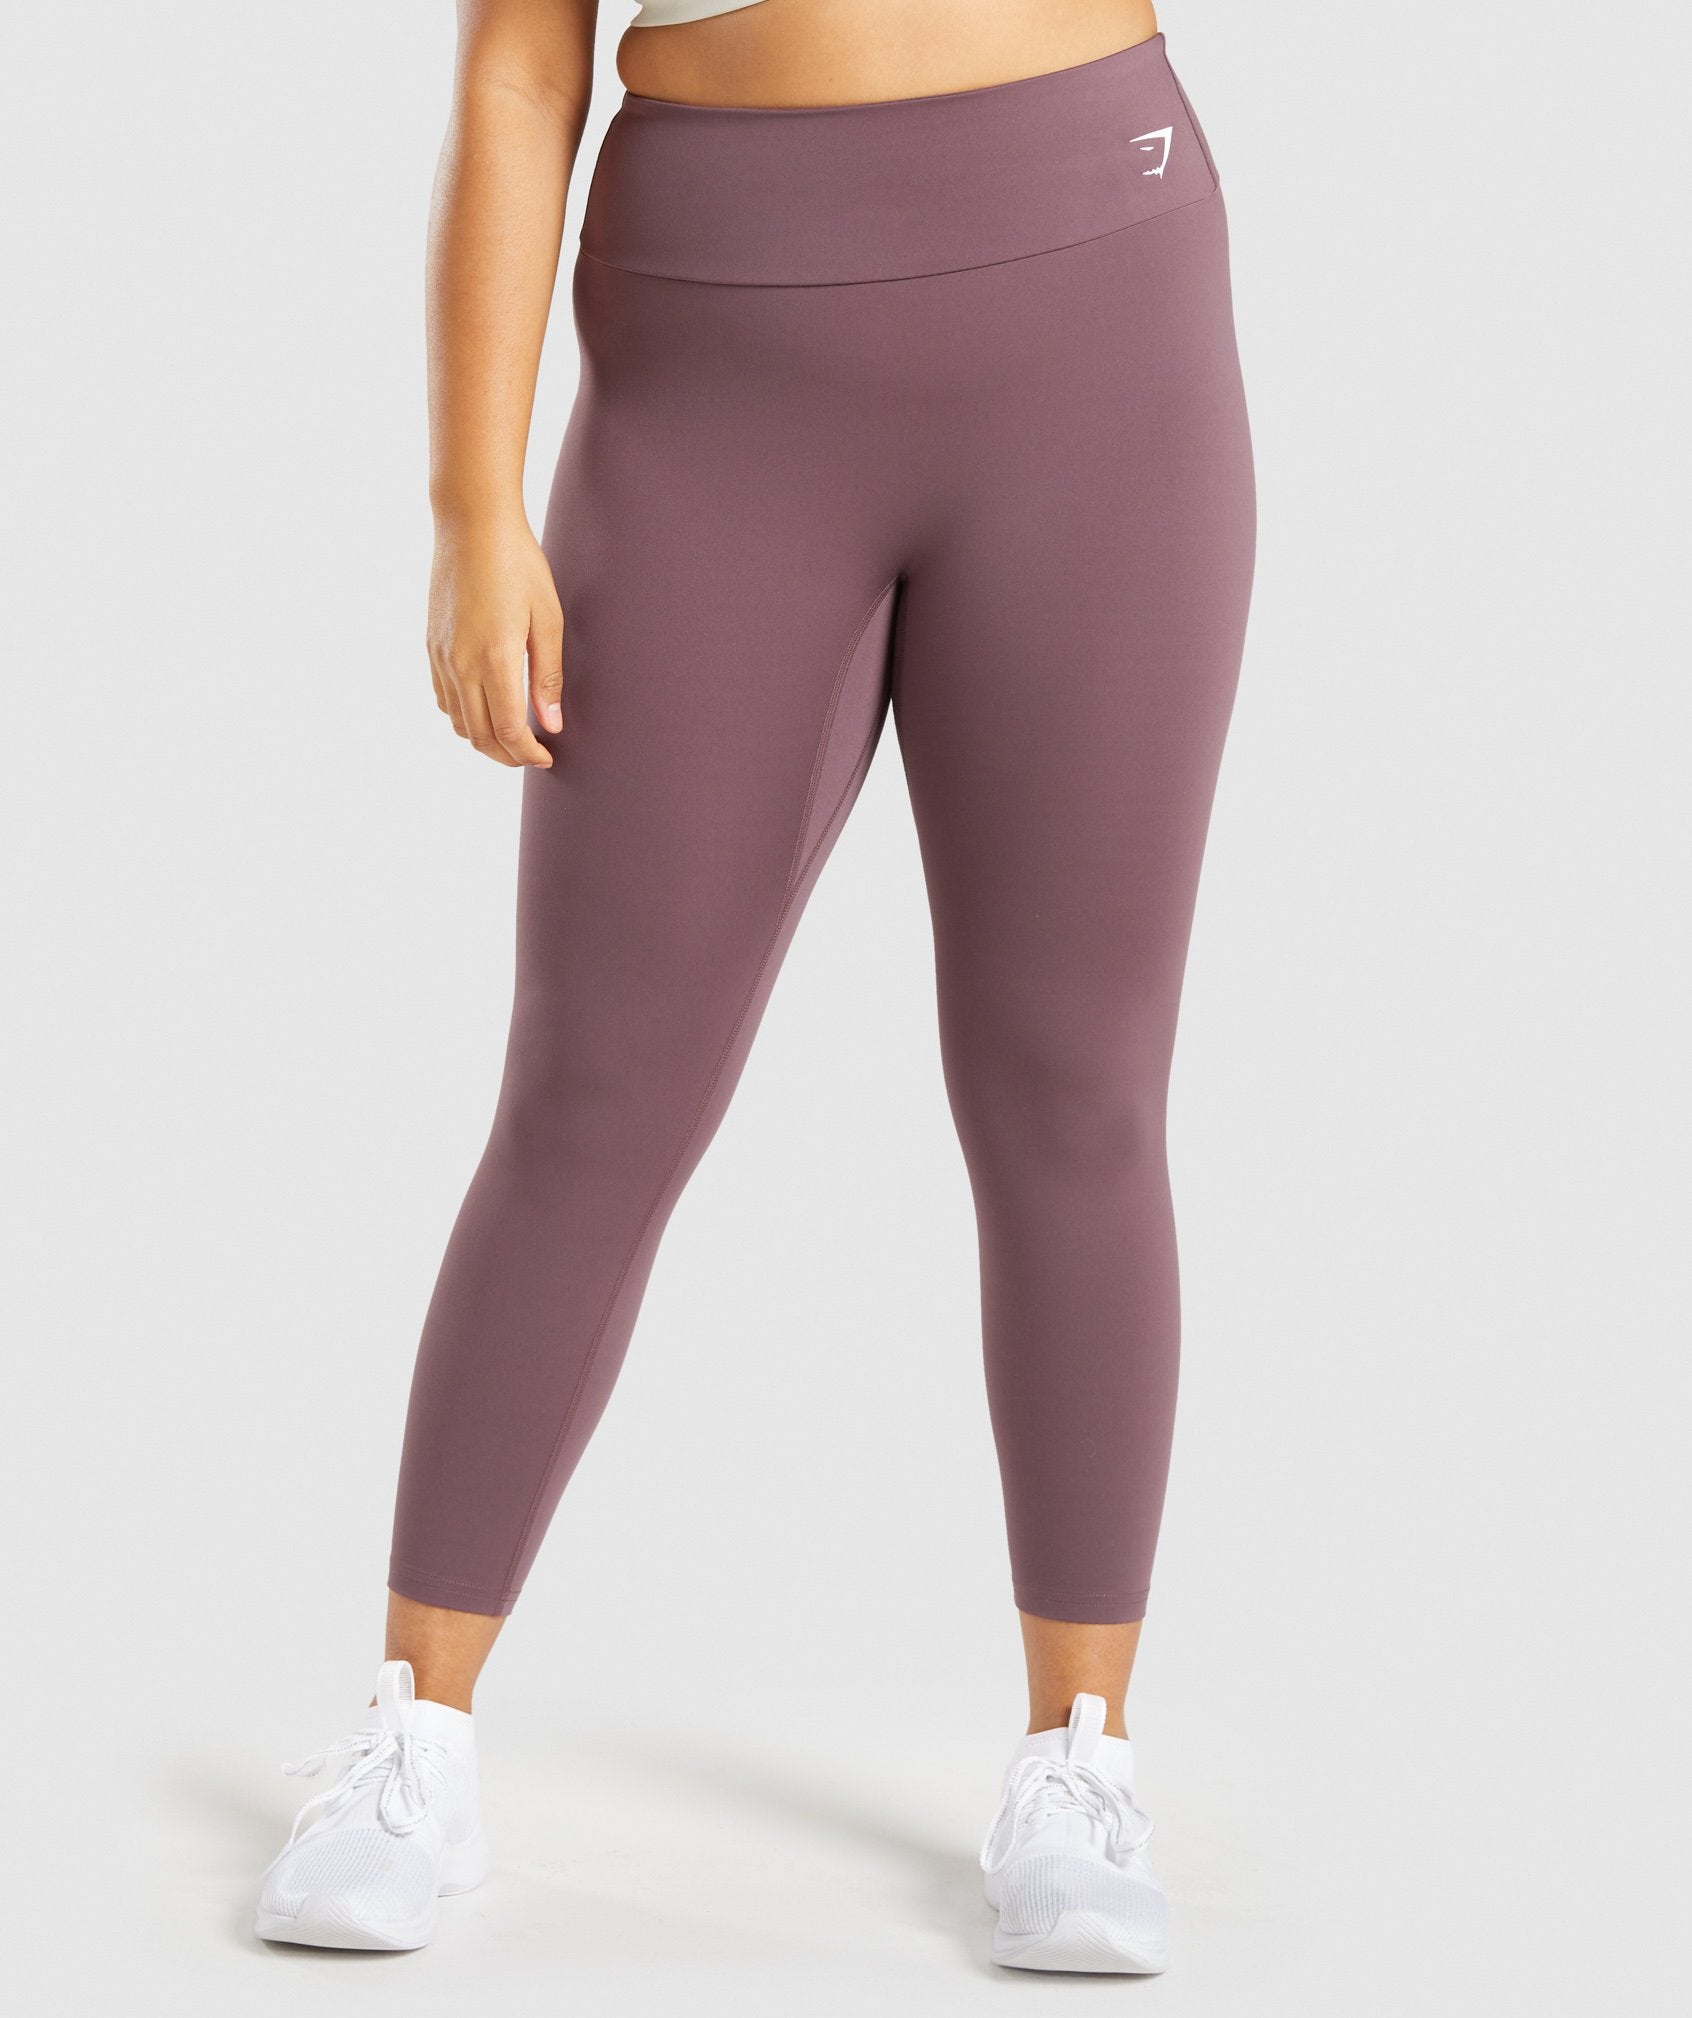 Gymshark Training 7/8 Leggings - Brown – Client 446 100K products